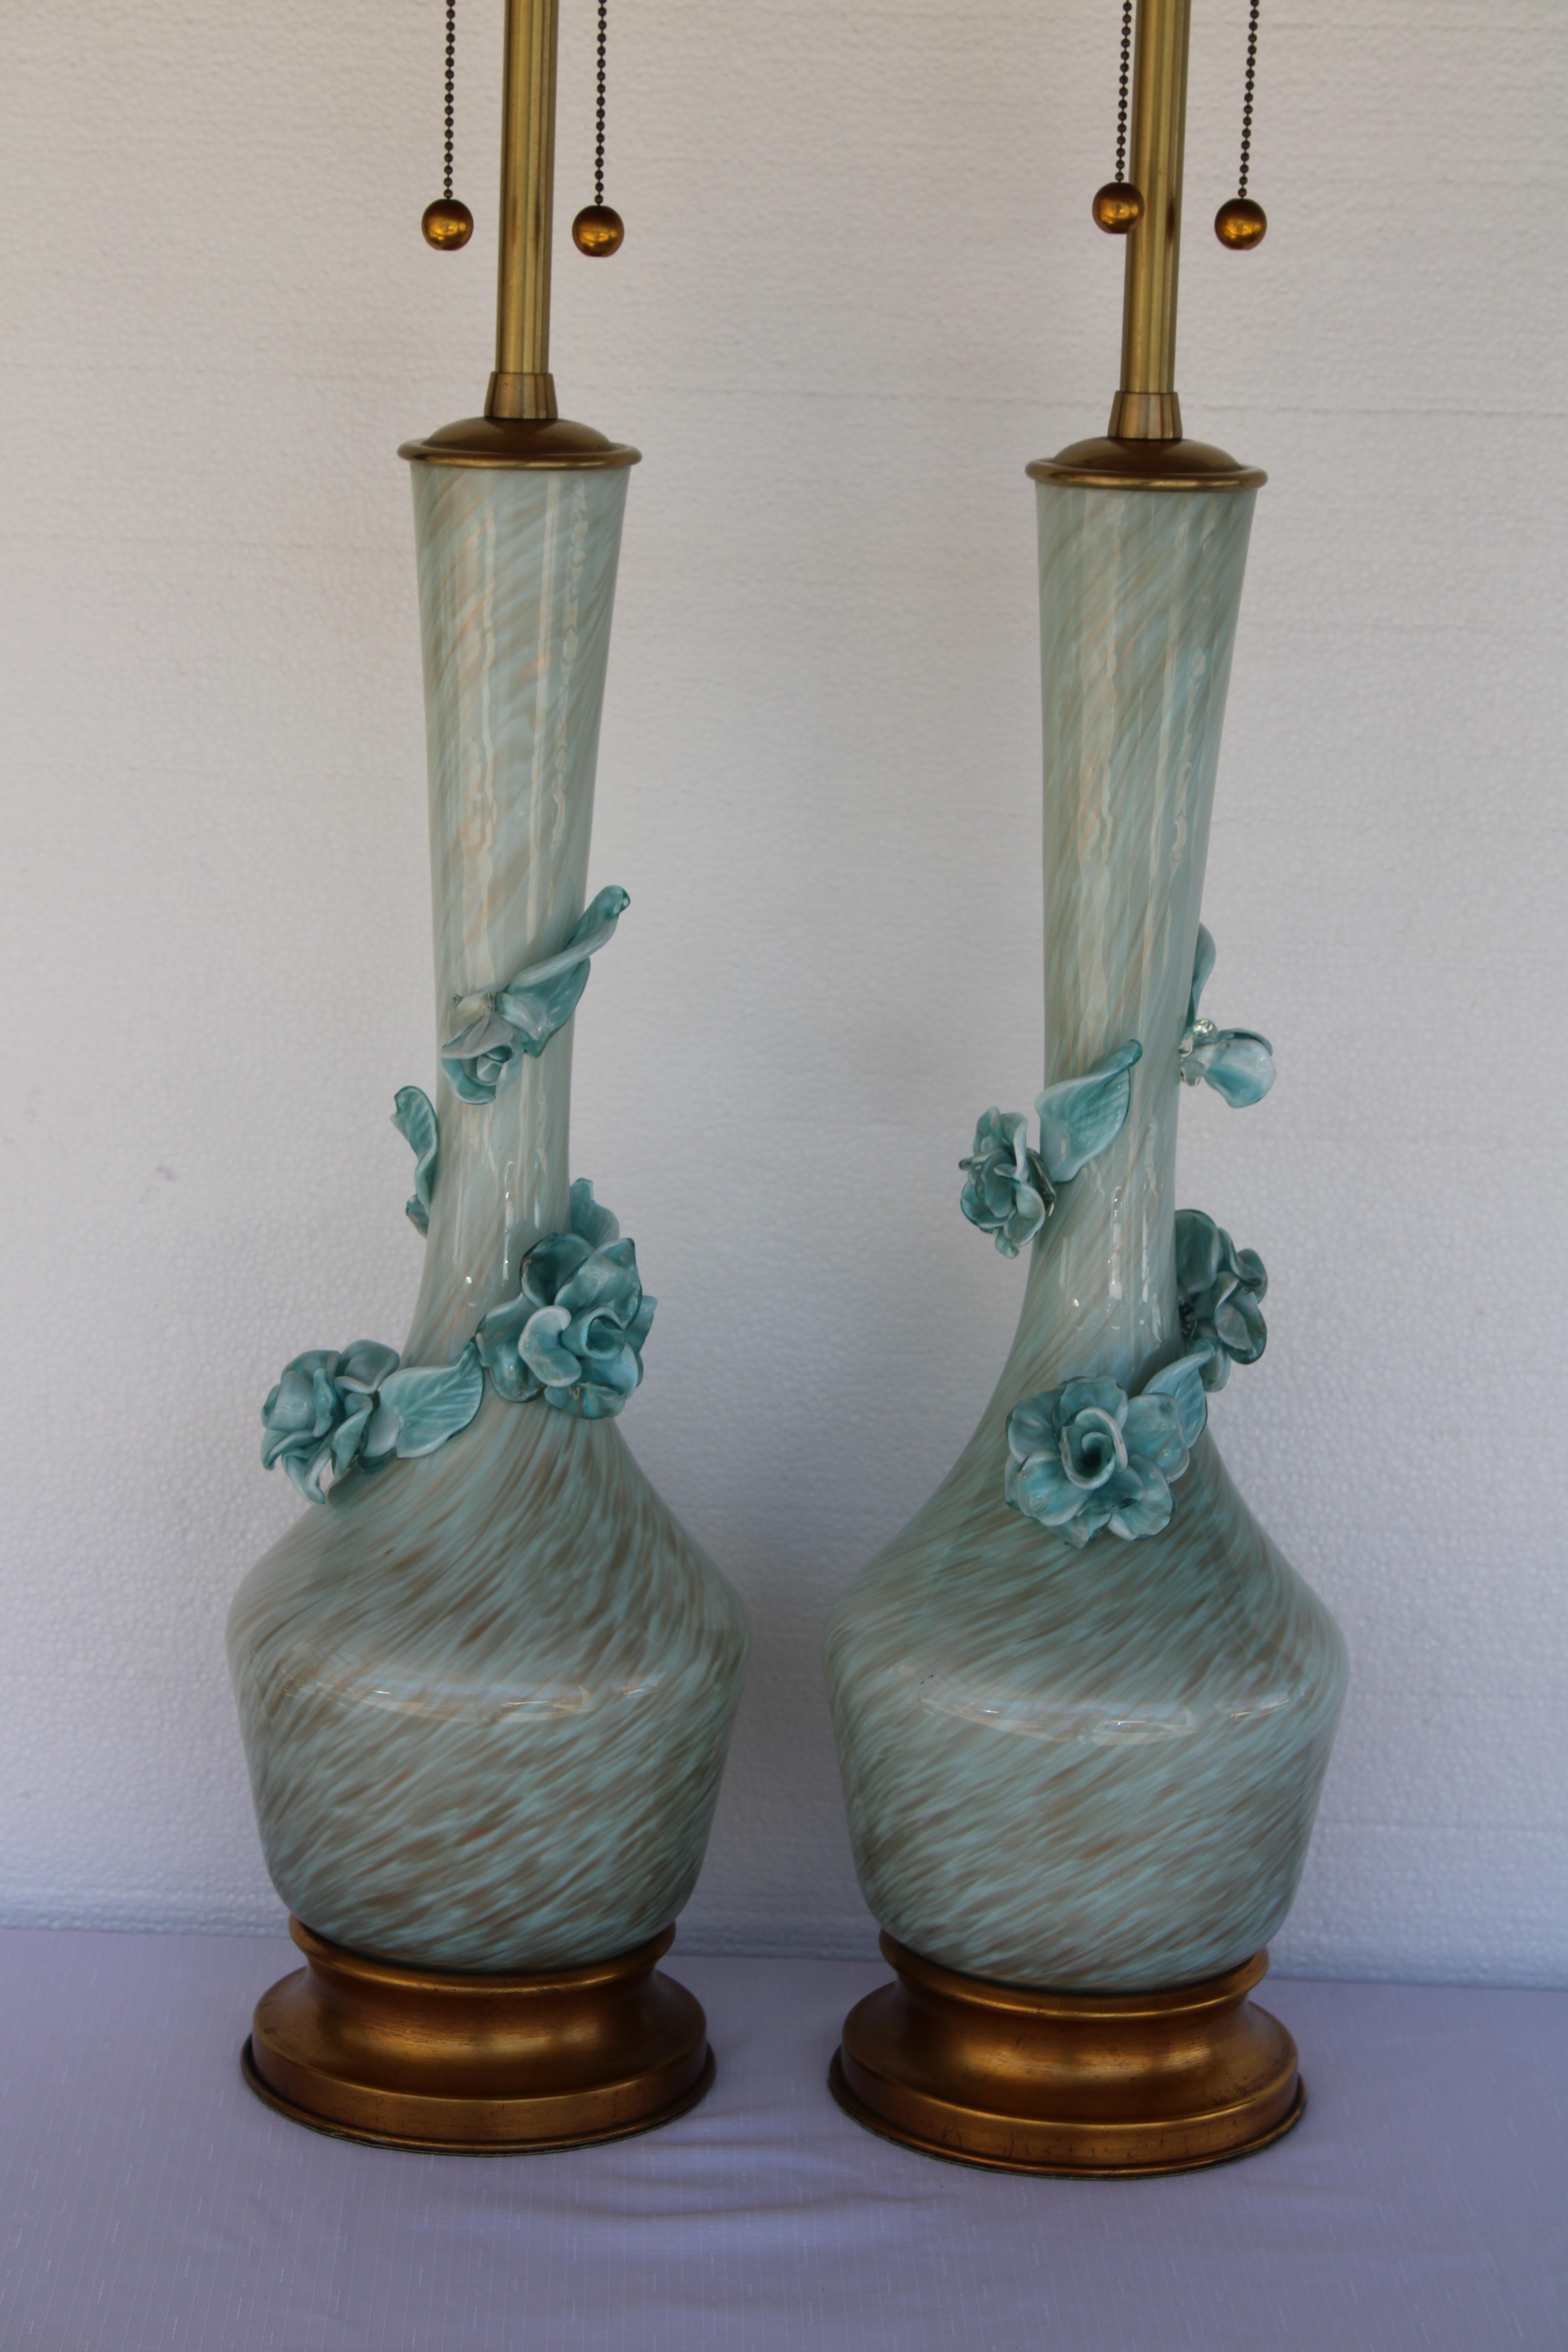 Pair of venetian glass lamps by The Marbro Lamp Company.  Each lamp measures 8” diameter,  44.5” high from base to the top of finial.  Glass portions are 21.5” high.  Lamps have been professionally rewired.
     